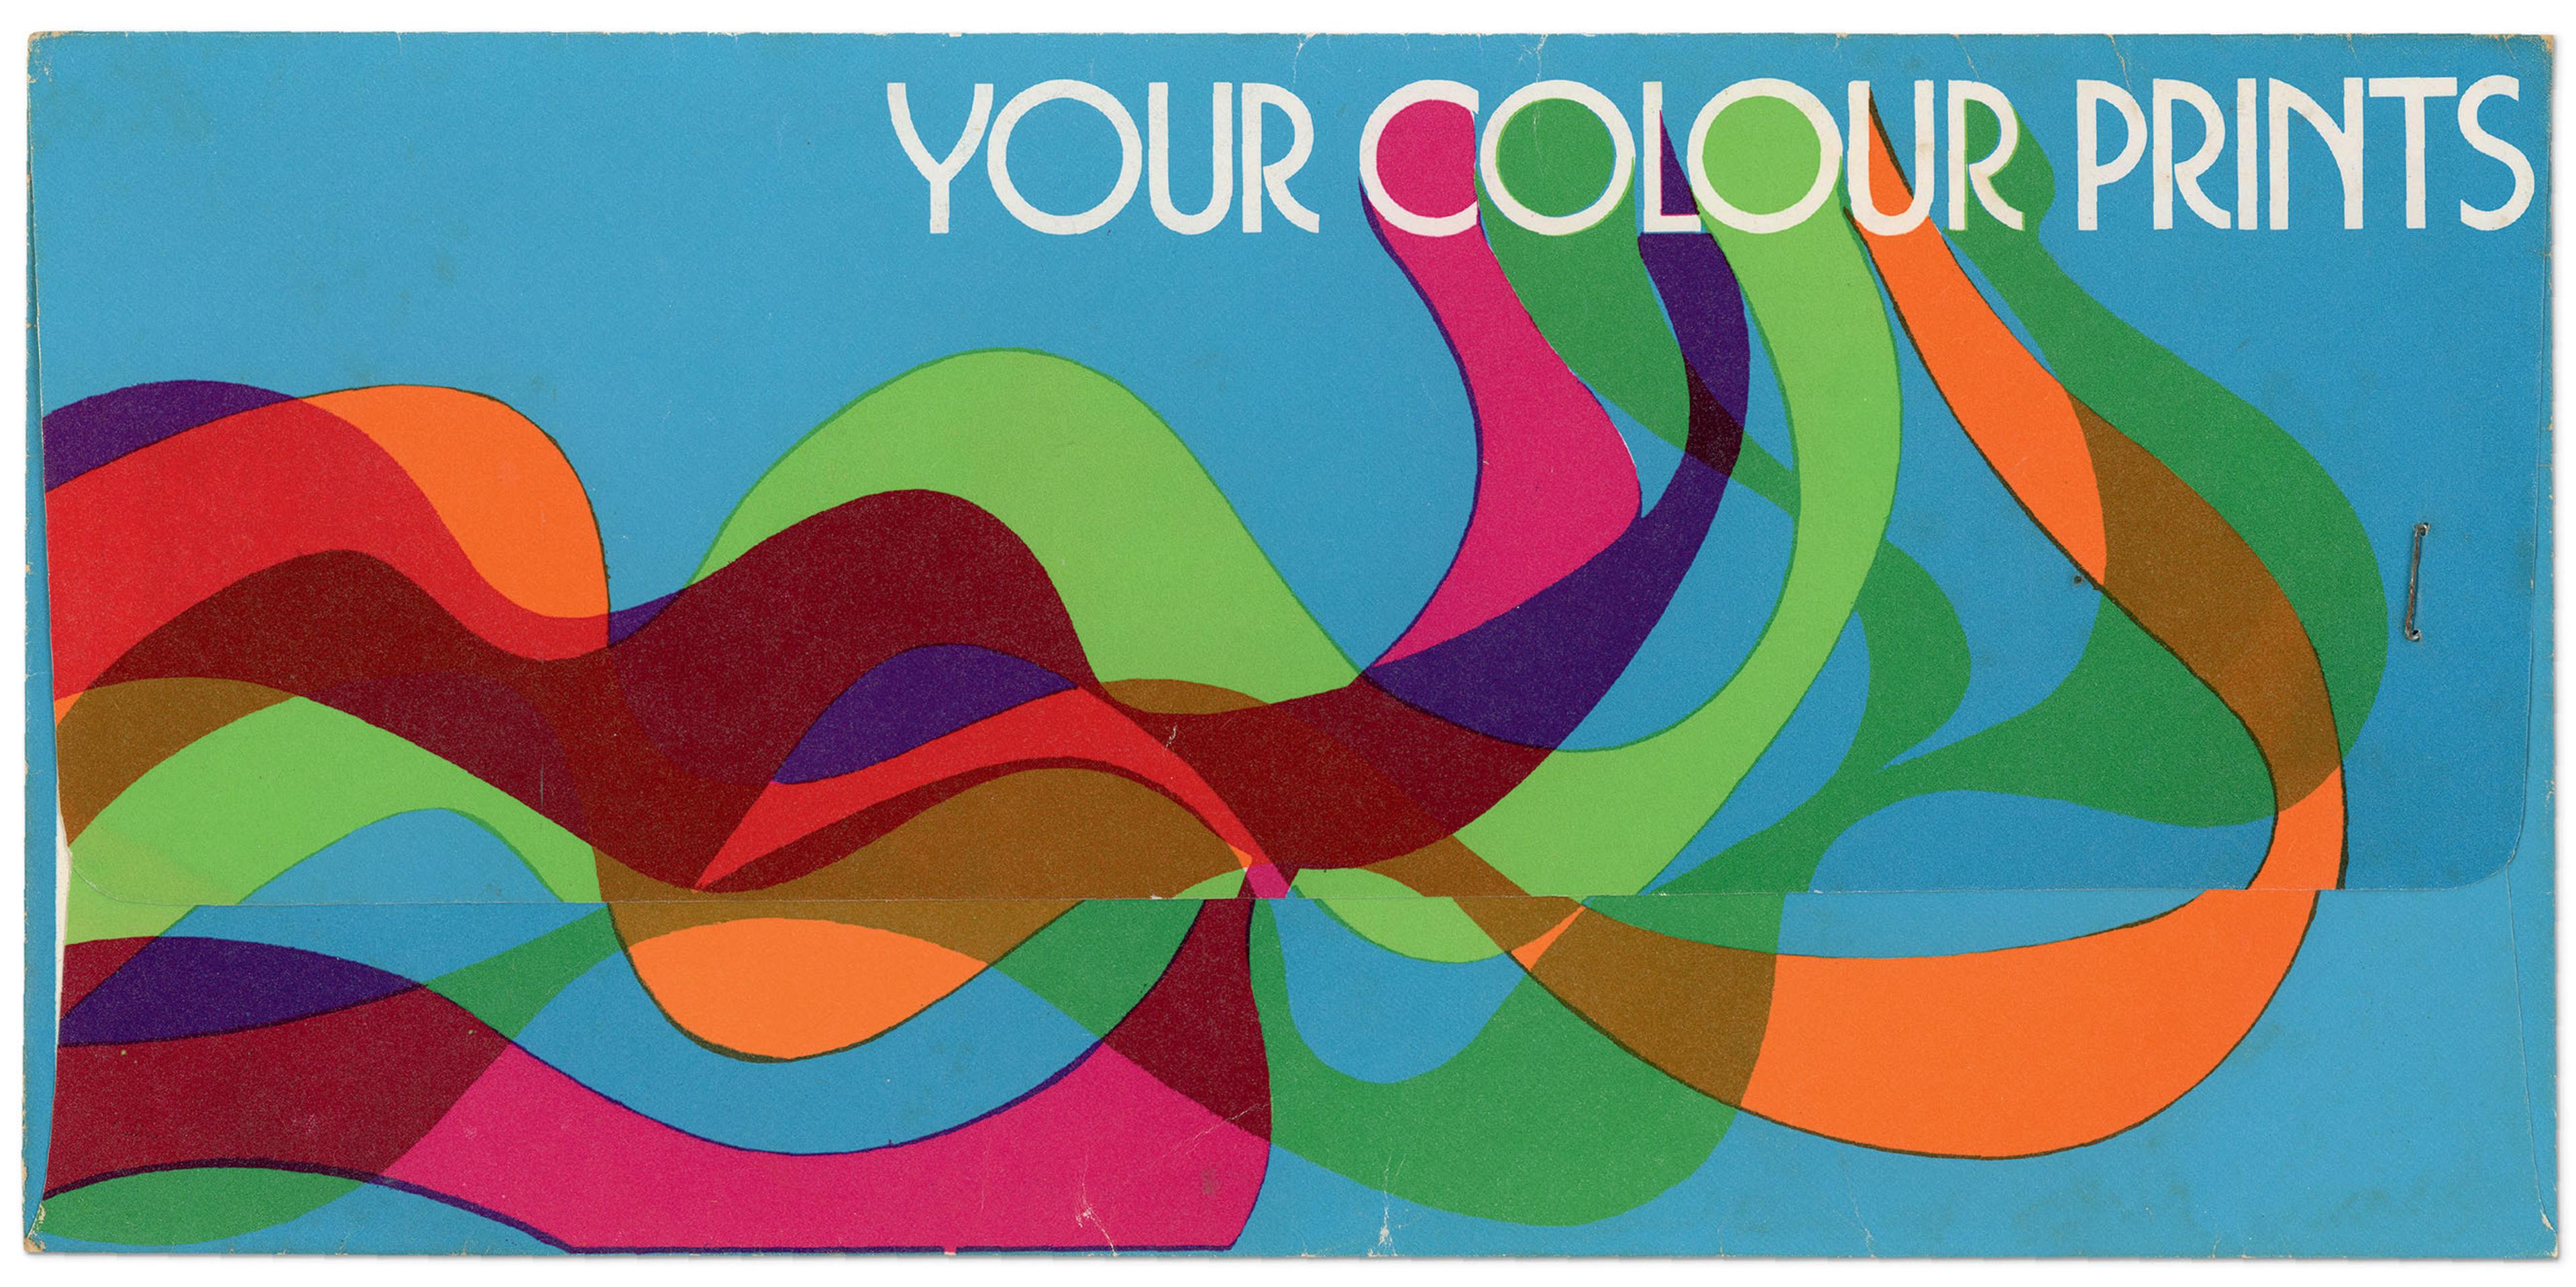 Photo of an envelope with colourful wavy lines with the text 'YOUR COLOUR PRINTS'.